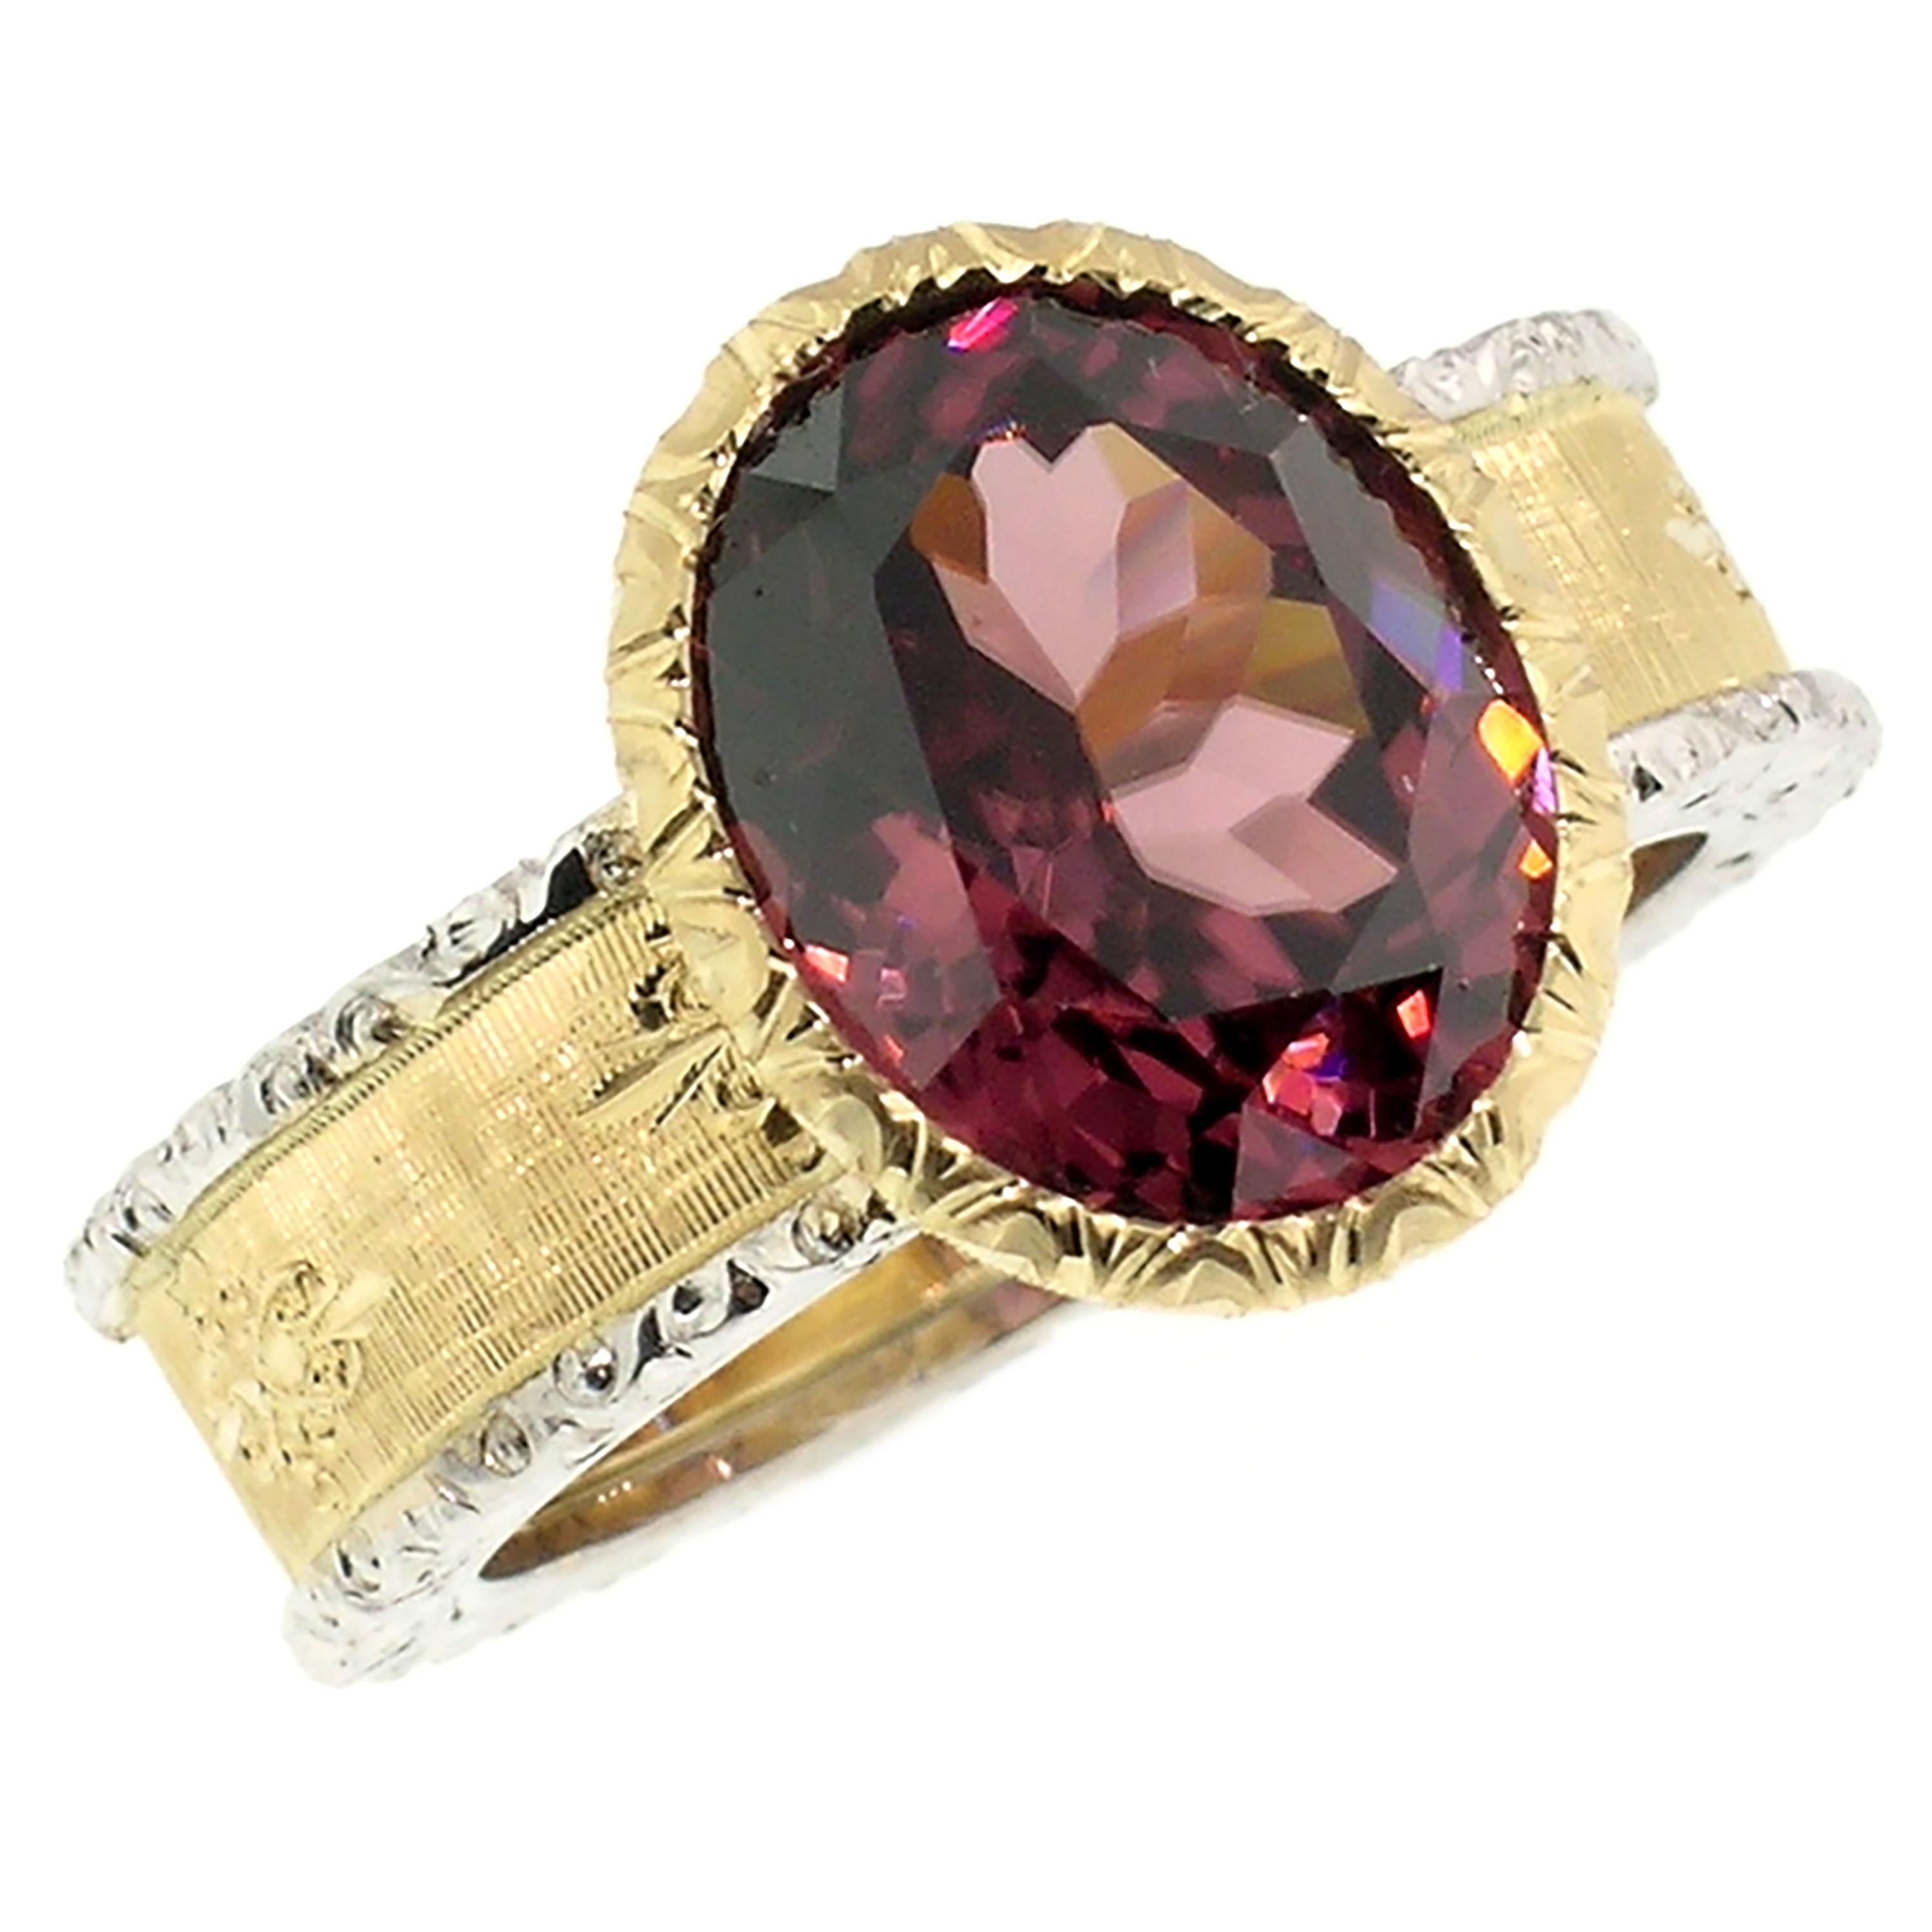 18kt Hand Engraved Ring with Tanzanian Pink Zircon, Handmade in Florence, Italy